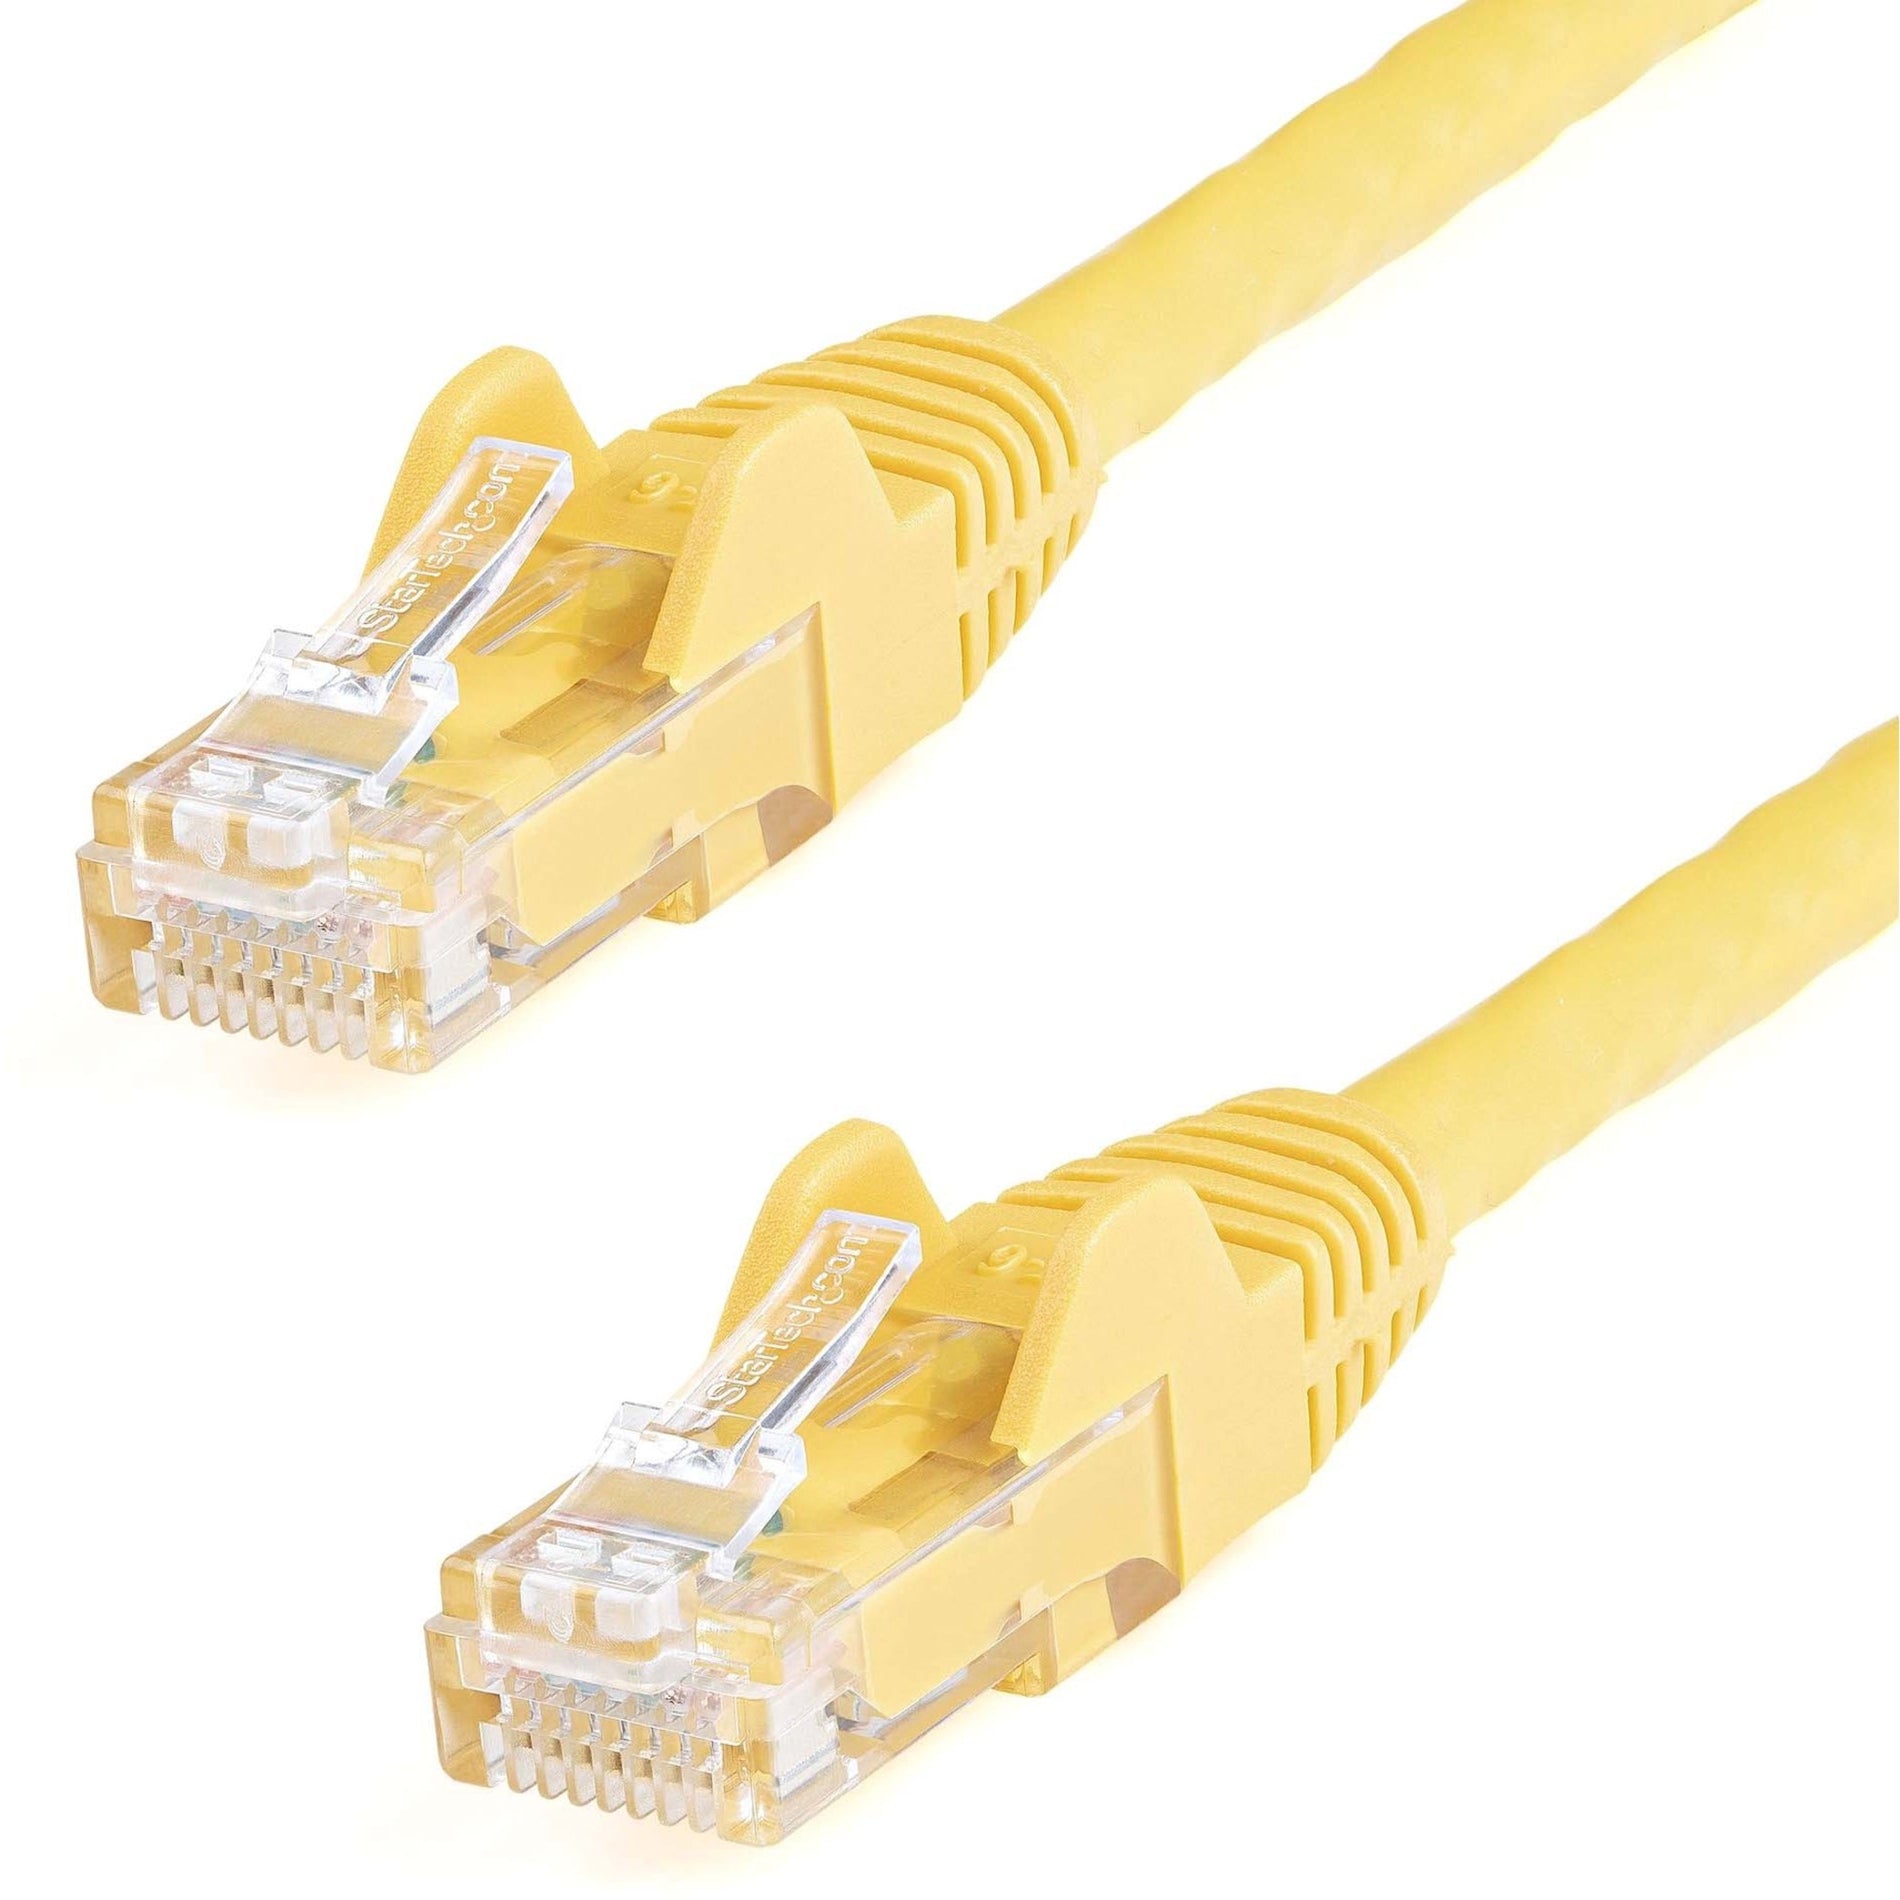 StarTech.com N6PATCH4YL Cat6 Patch Cable, 4ft Yellow Ethernet Cable, Snagless RJ45 Connectors